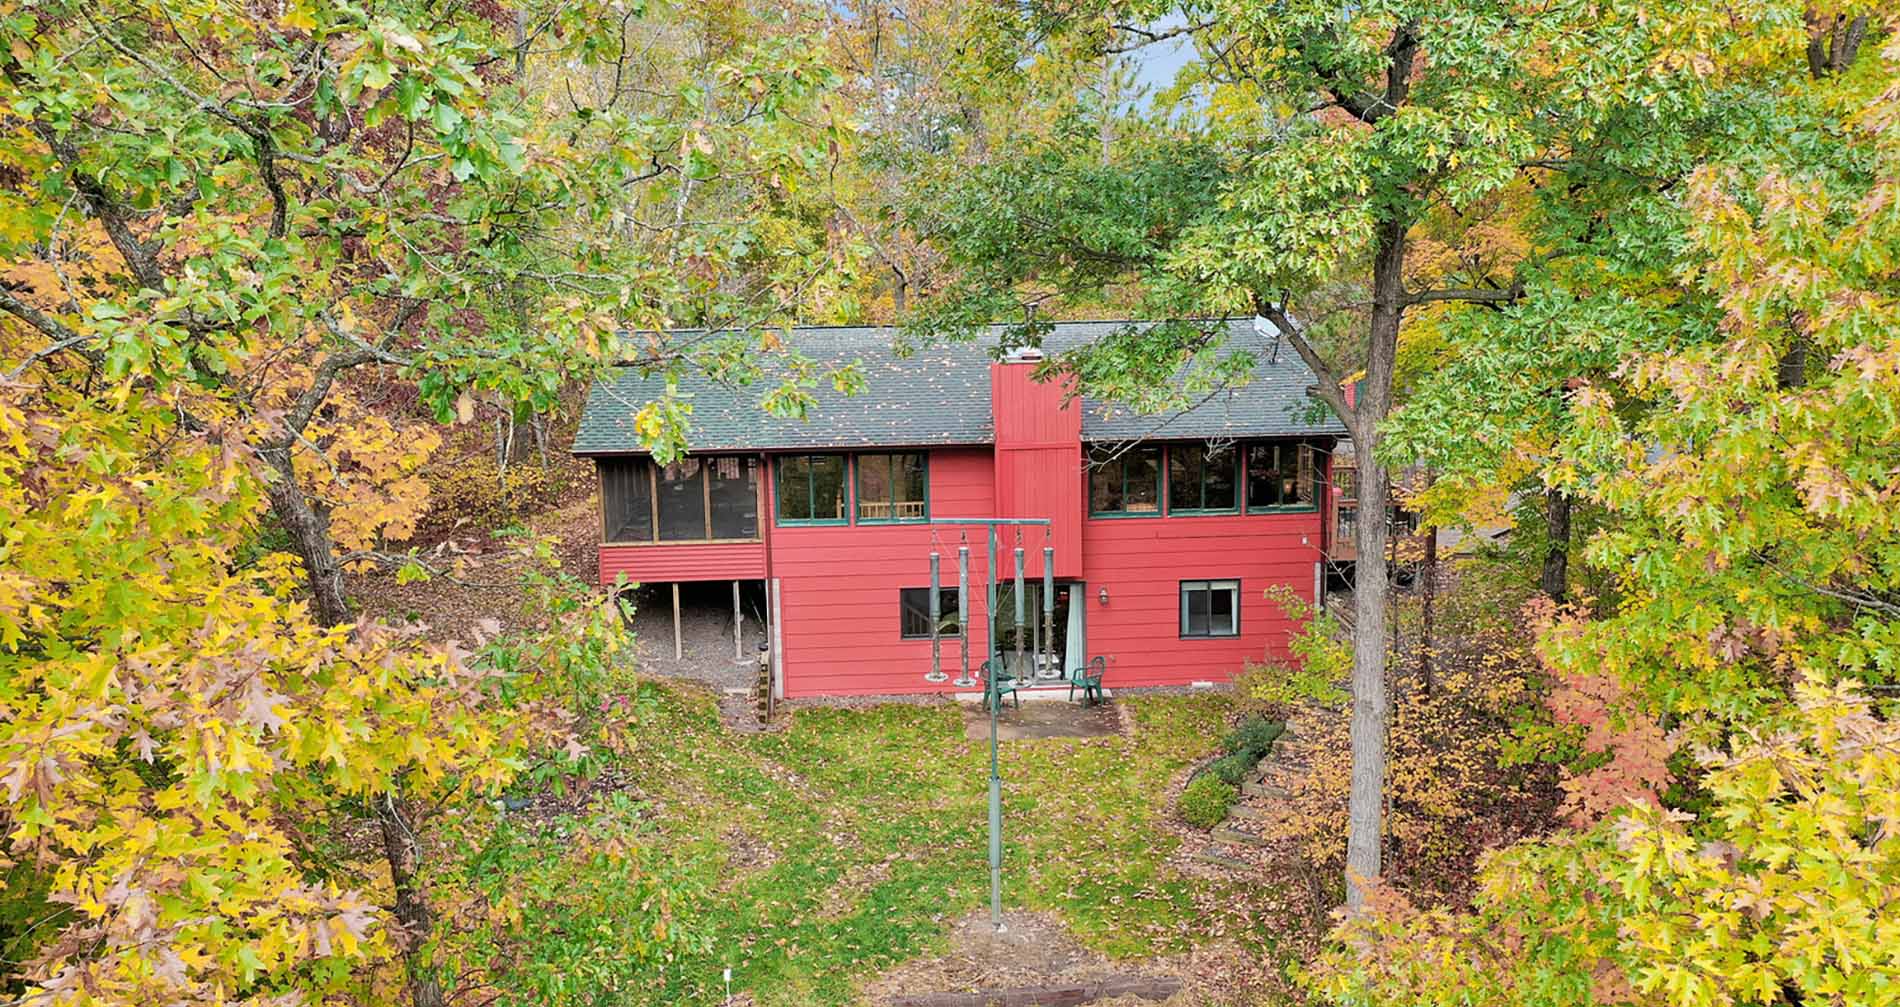 Exterior view, through the trees, of the 2 story red cabin with full screened in porch